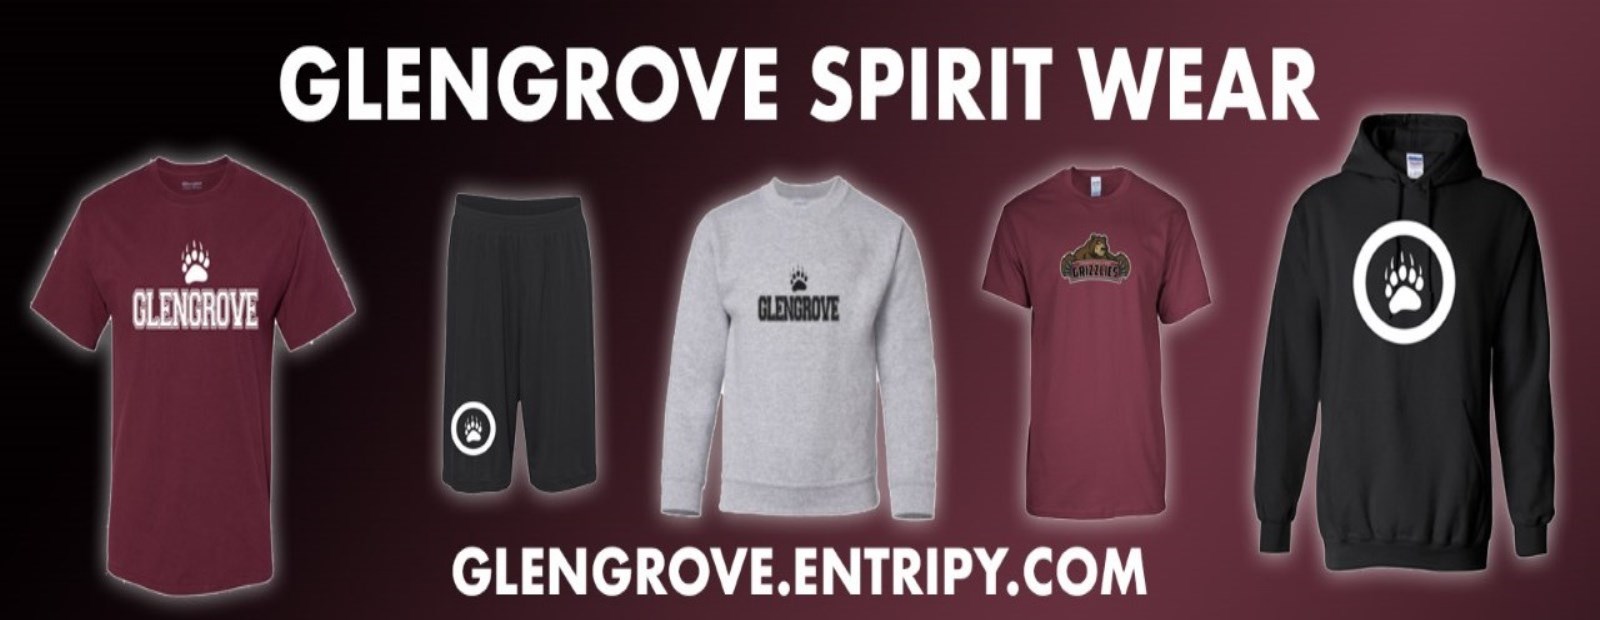 t-shirts and hoodies with Glengrove logo